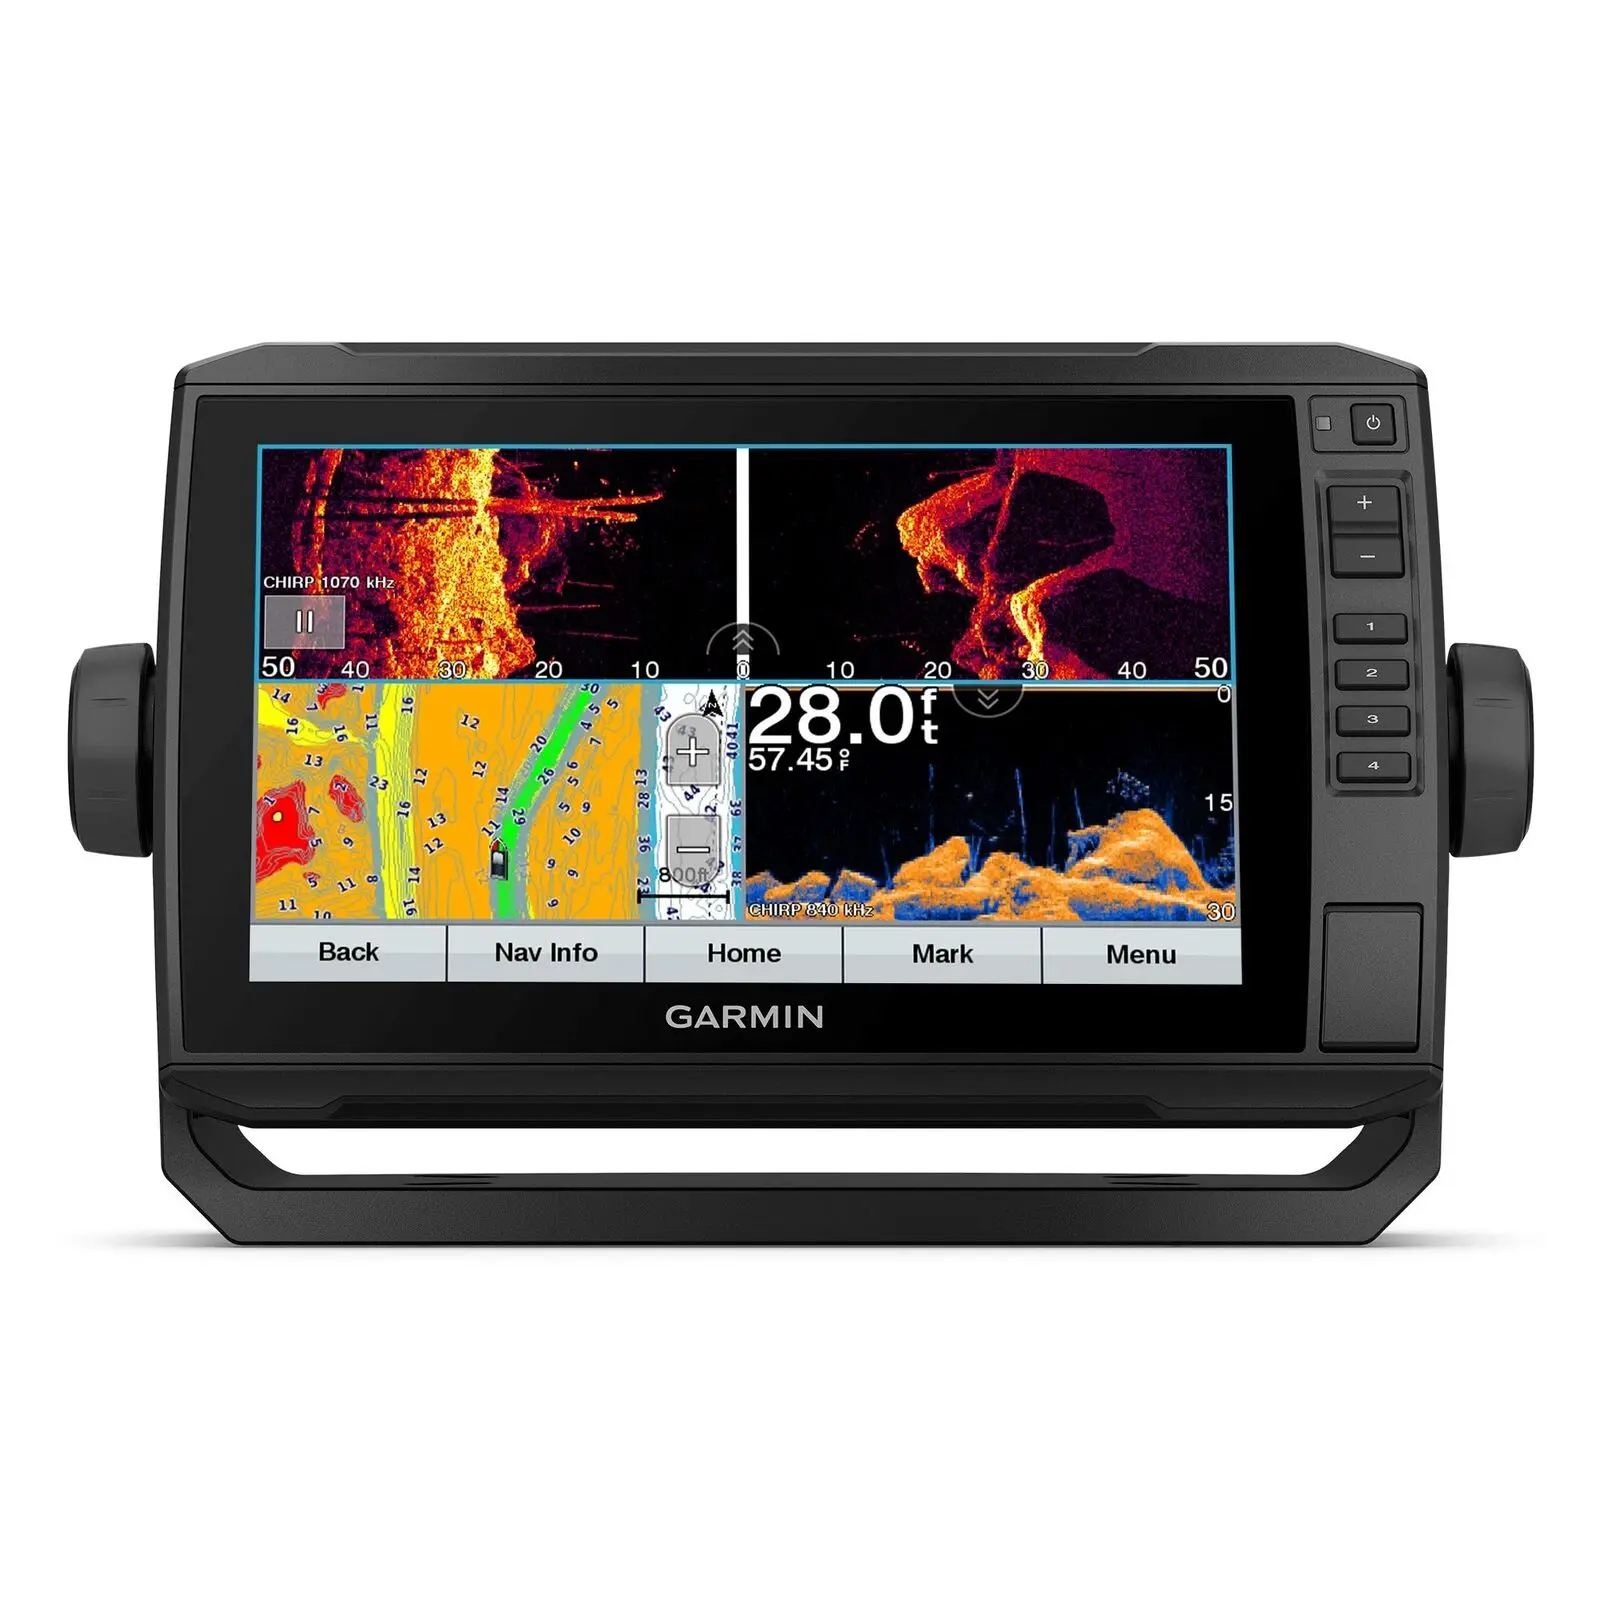 

END OF THE YEAR SALES Garmins ECHOMAP UHD 93sv with GT56UHD-TM Transducer, 9"" Keyed-Assist Touchscreen Chartplotter with U.S. L